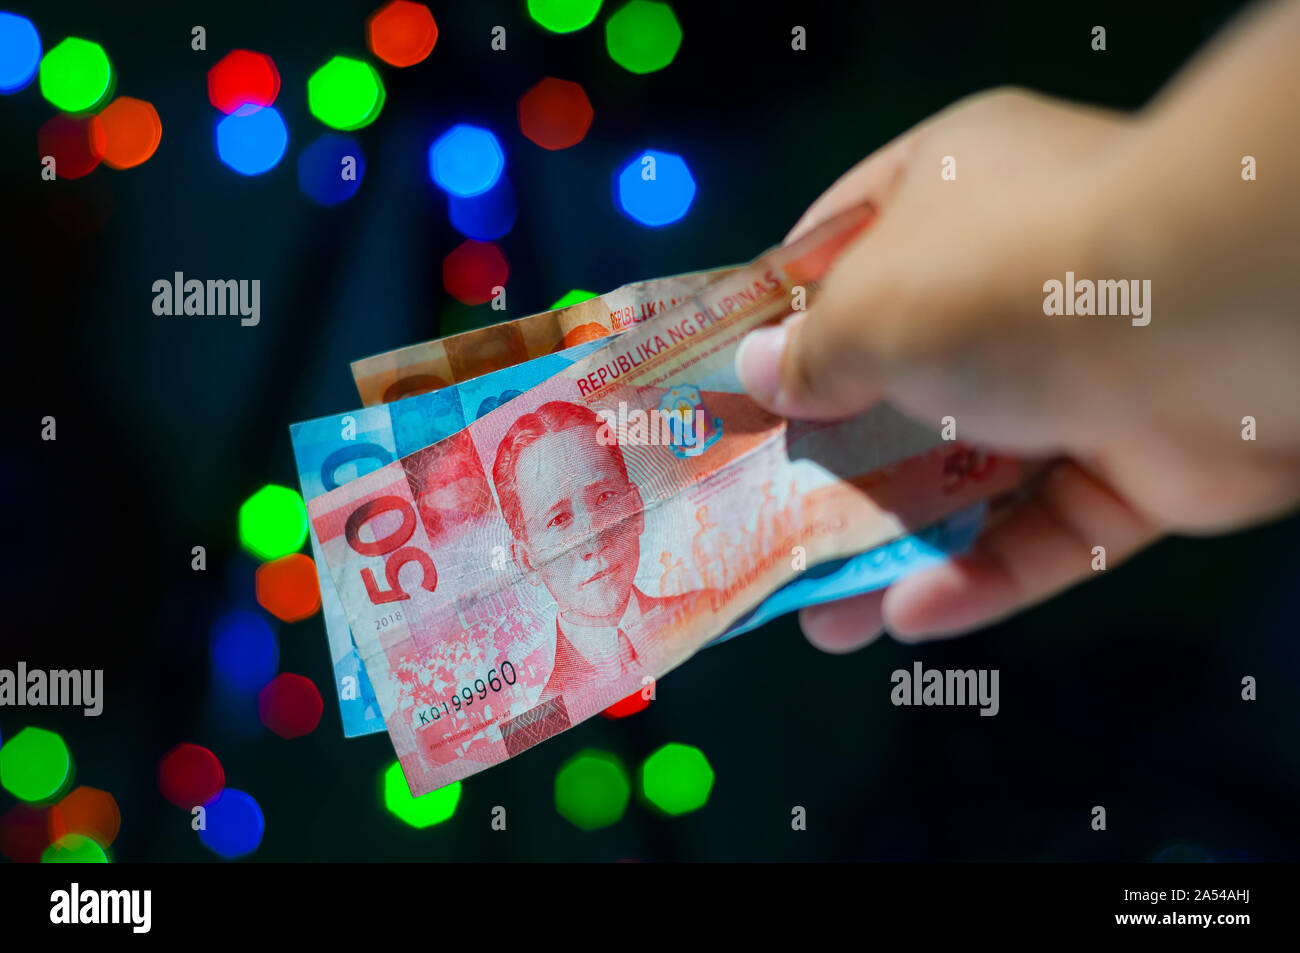 Giving monetary gift in Christmas. Handing out cash as a gift for Holiday. Filipino tradition called Pamasko. Stock Photo